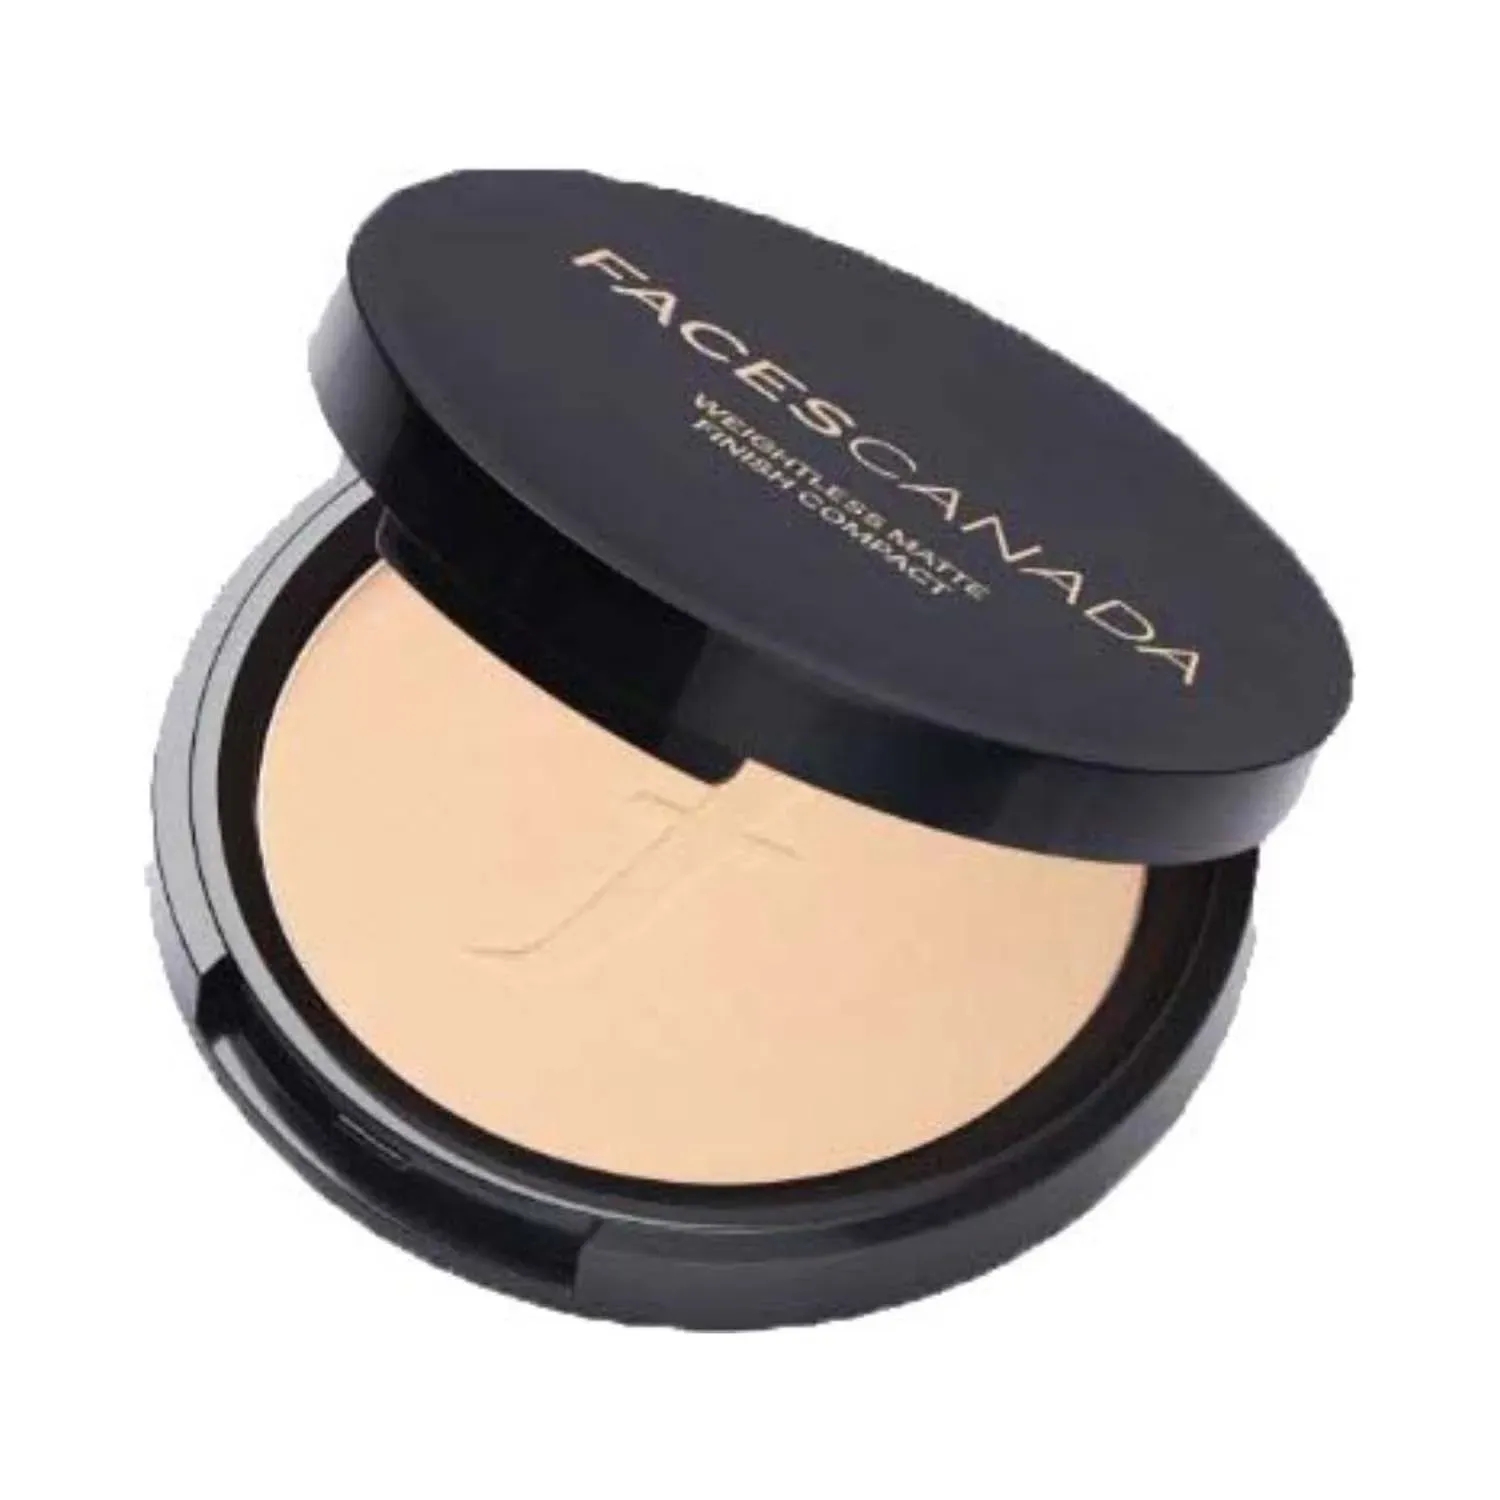 Faces Canada | Faces Canada Weightless Matte Finish Compact - 02 Natural (9g)